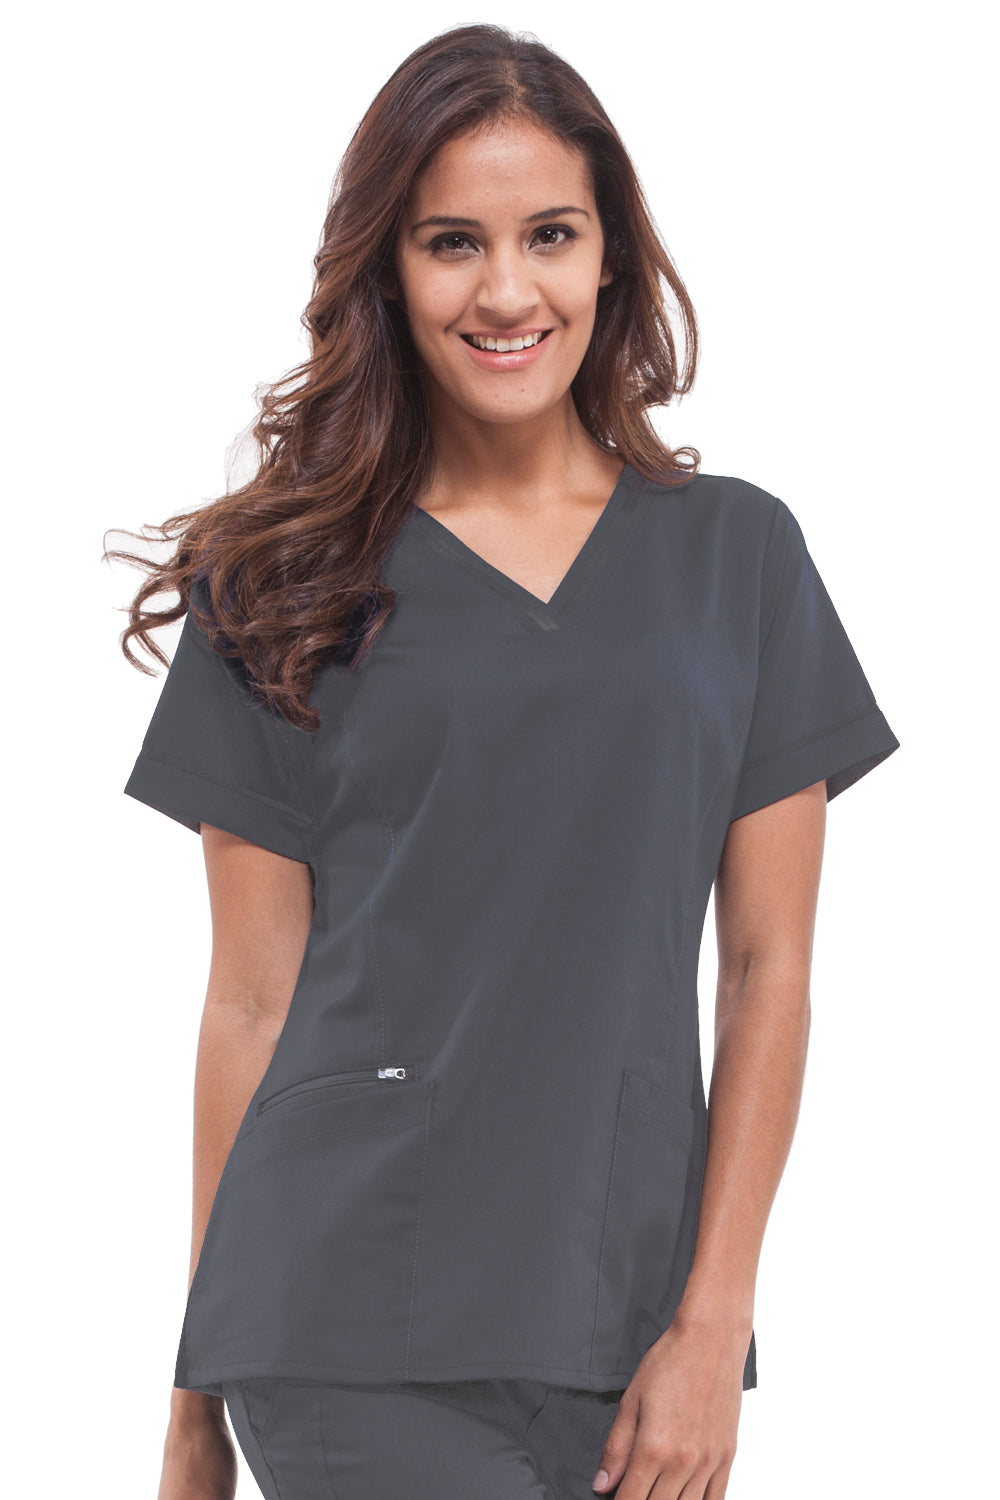 Healing Hands Scrub Top Purple Label Jasmin in Pewter at Parker's Clothing and Shoes.